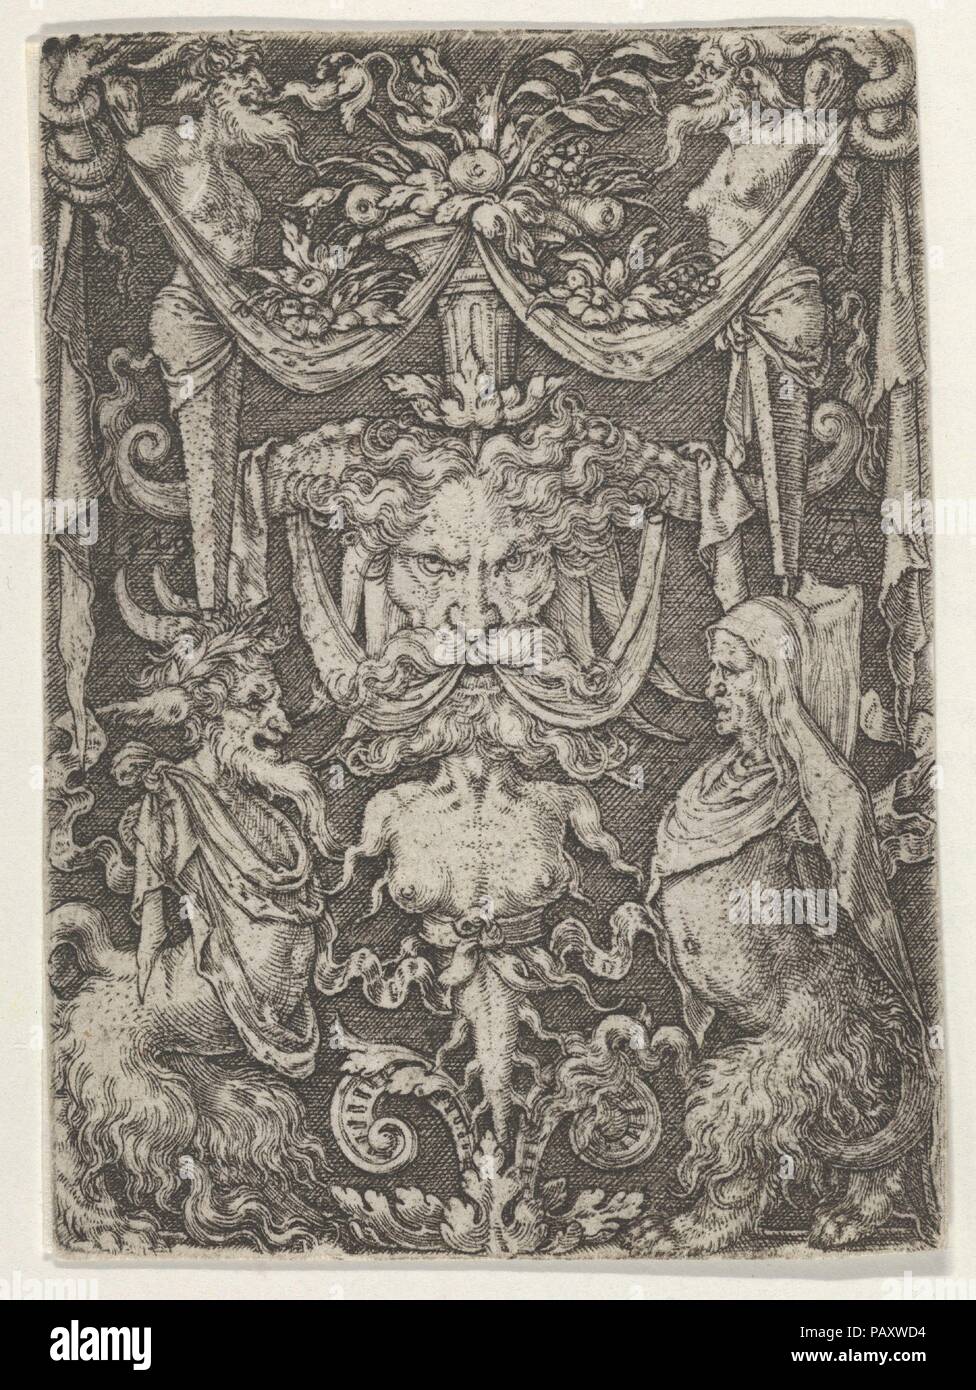 Panel with Grotesque Candelabrum Containing a Mask and Two Satyrs. Artist: Heinrich Aldegrever (German, Paderborn ca. 1502-1555/1561 Soest). Dimensions: Sheet: 2 5/8 × 1 15/16 in. (6.7 × 4.9 cm). Date: 1549.  Ornamental design panel with mask at center, flanked by two satyrs. The date  is located above the head of the bearded satyr at left, and the artist's monogram is located above the head of the satyr at right. Museum: Metropolitan Museum of Art, New York, USA. Stock Photo